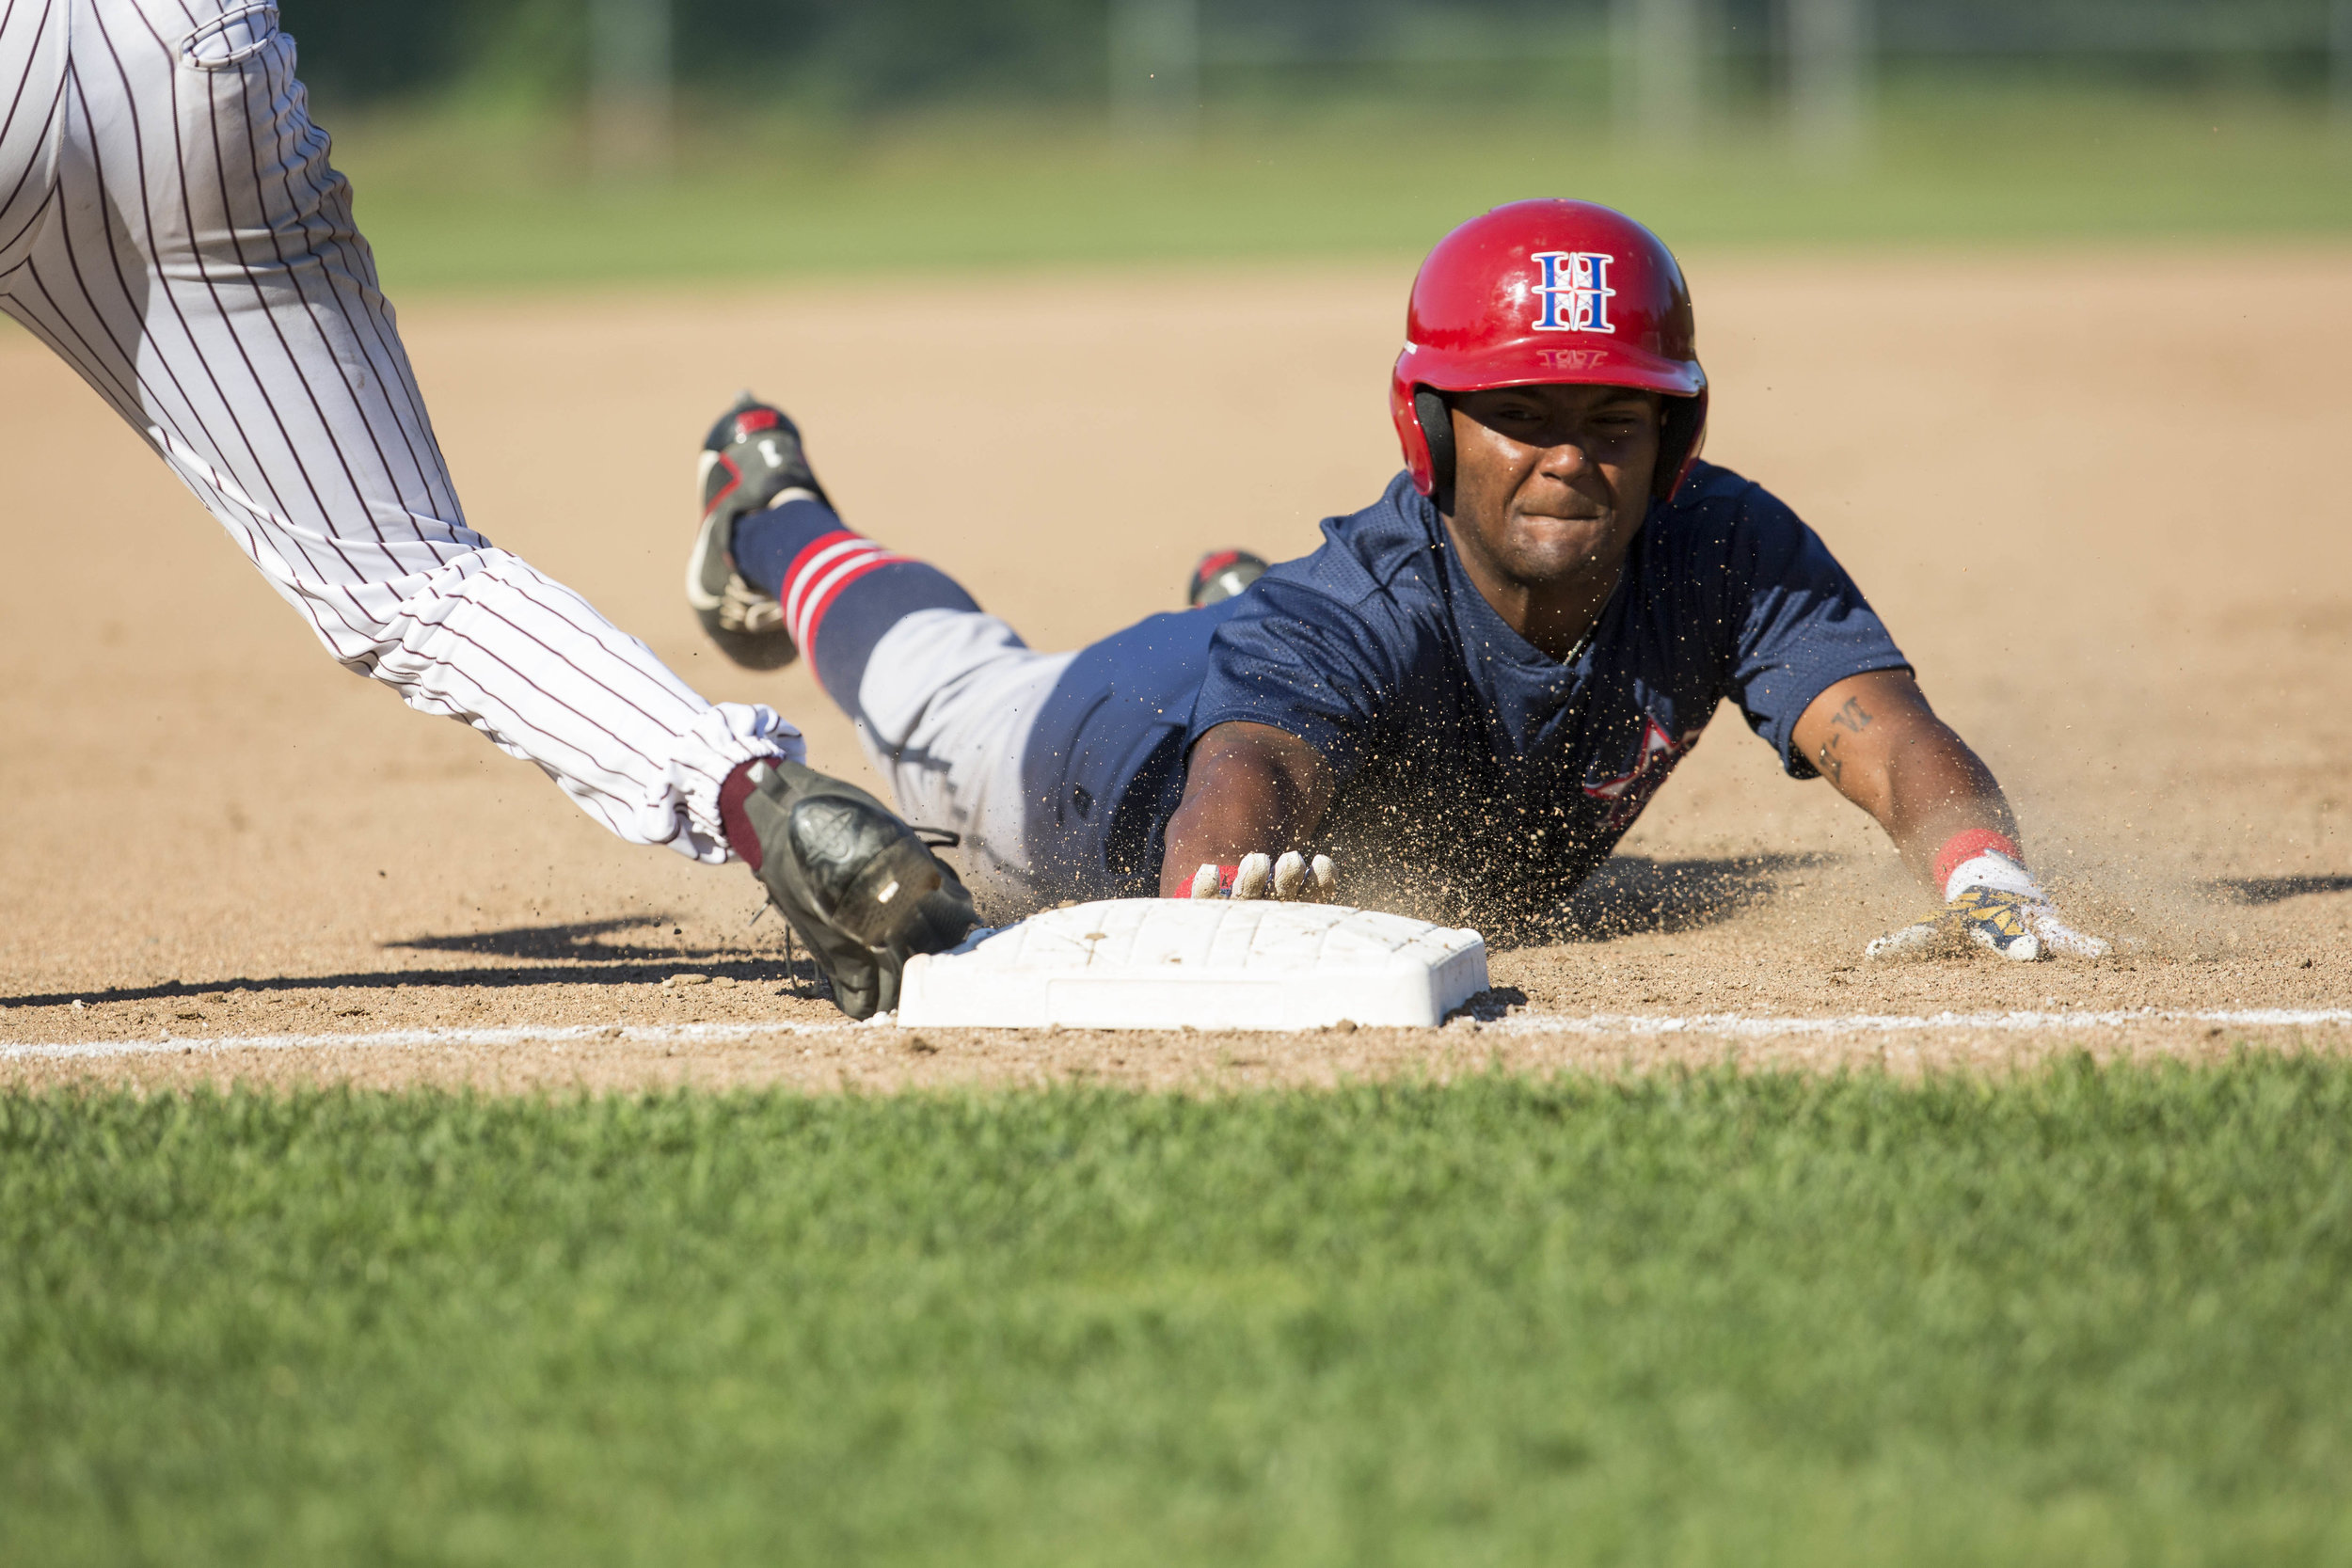  Cobie Vance, of the Harwich Mariners, slides to third base and was called safe during their game against the Cotuit Kettleers on July 9, 2017. 